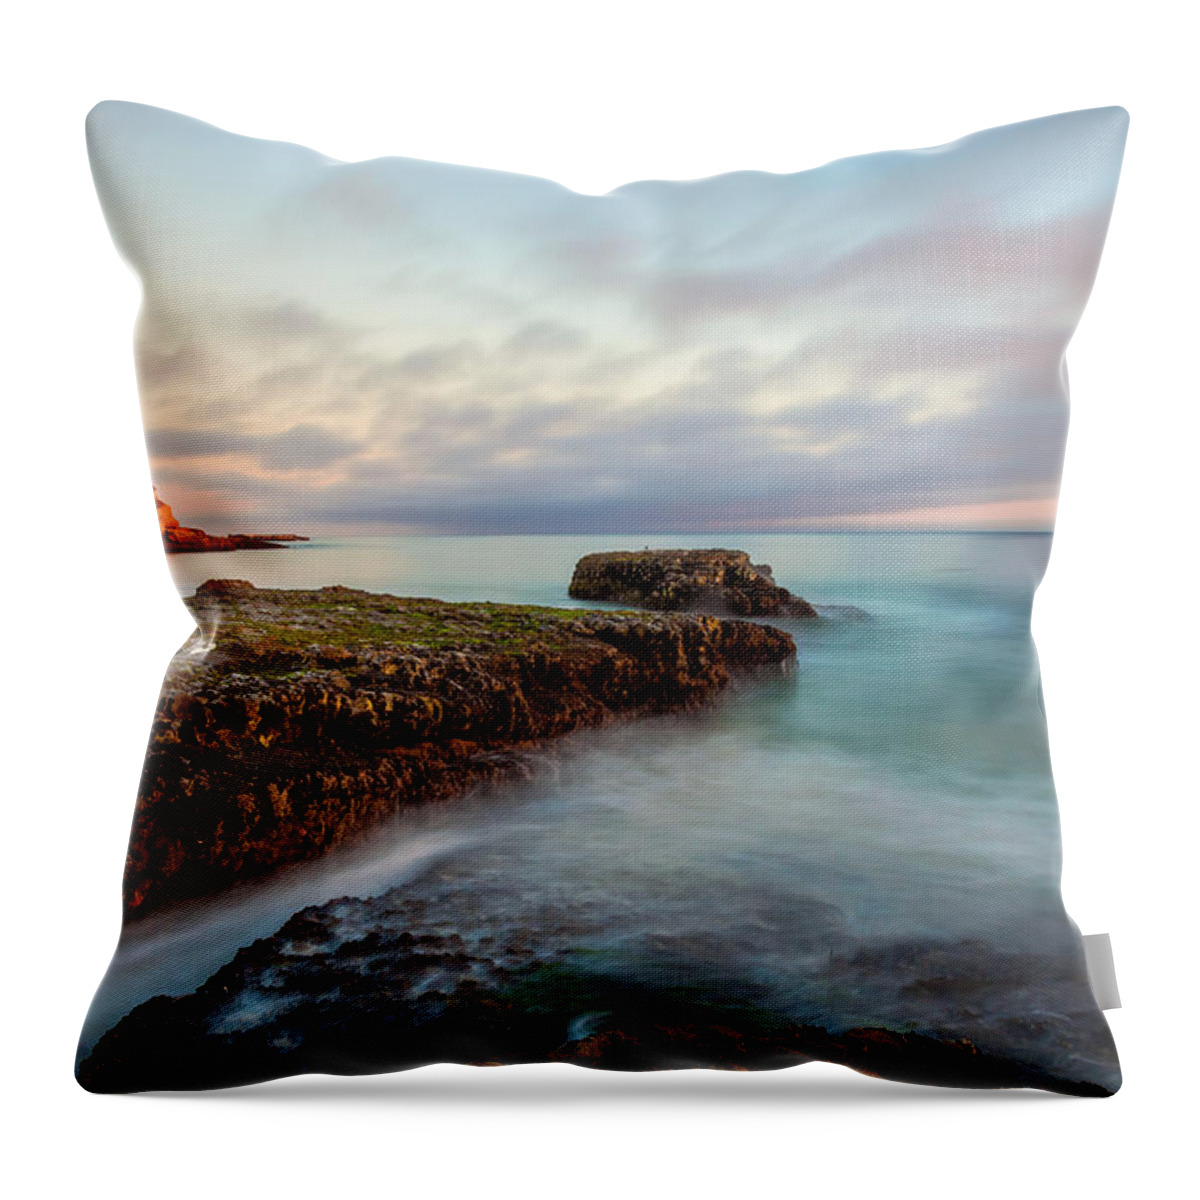 Landscape Throw Pillow featuring the photograph Storm Chaser by Jonathan Nguyen